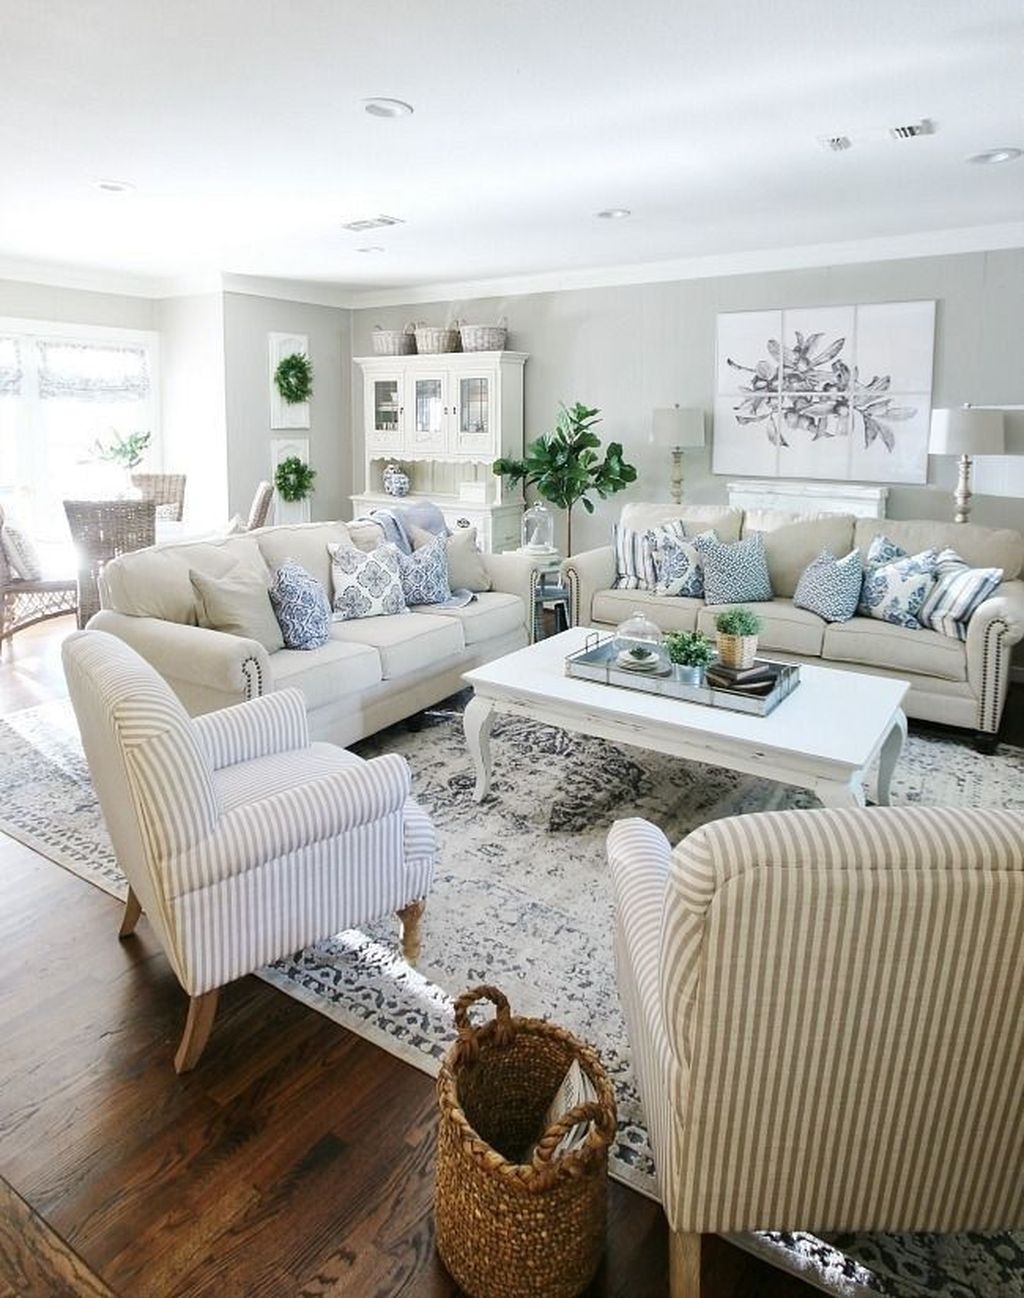 Popular Ways To Efficiently Arrange Furniture For Small Living Room 50